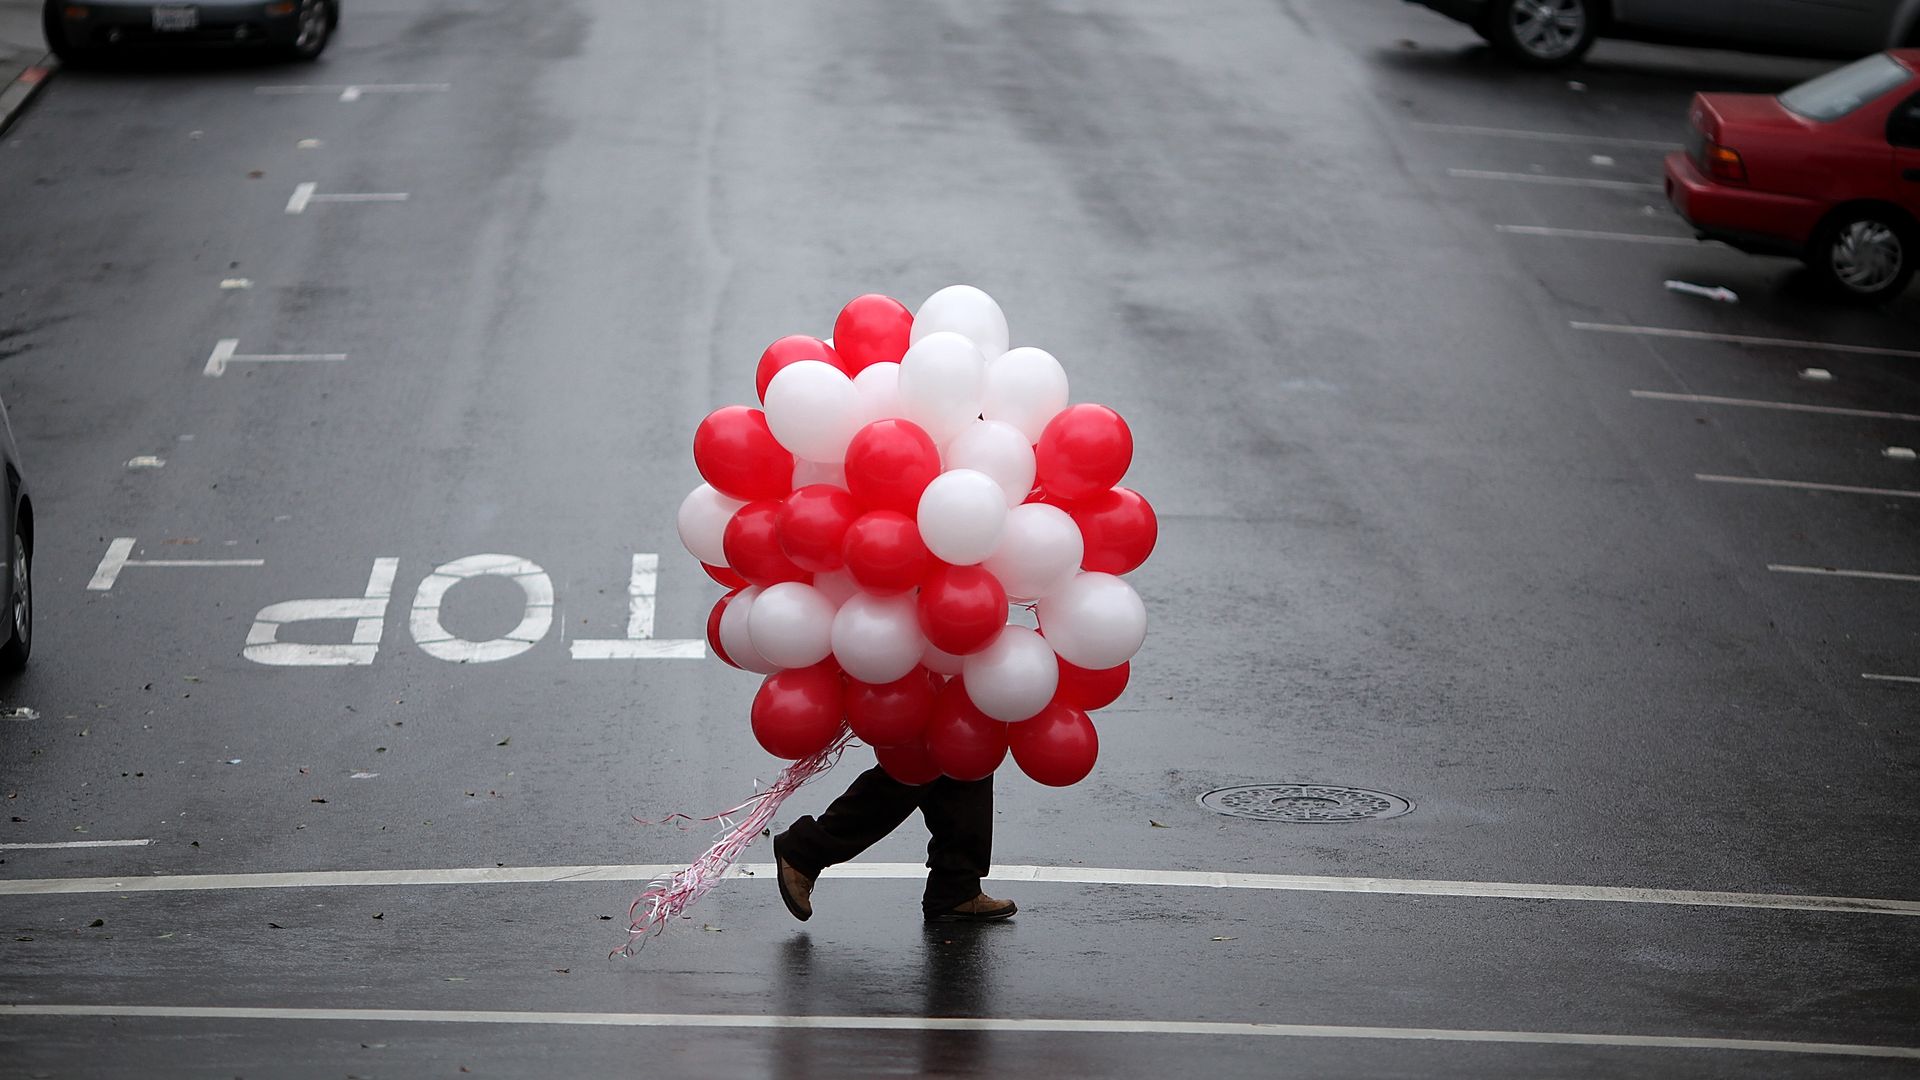 Obscured person carrying large bunch of red, white and pink balloons across street. 